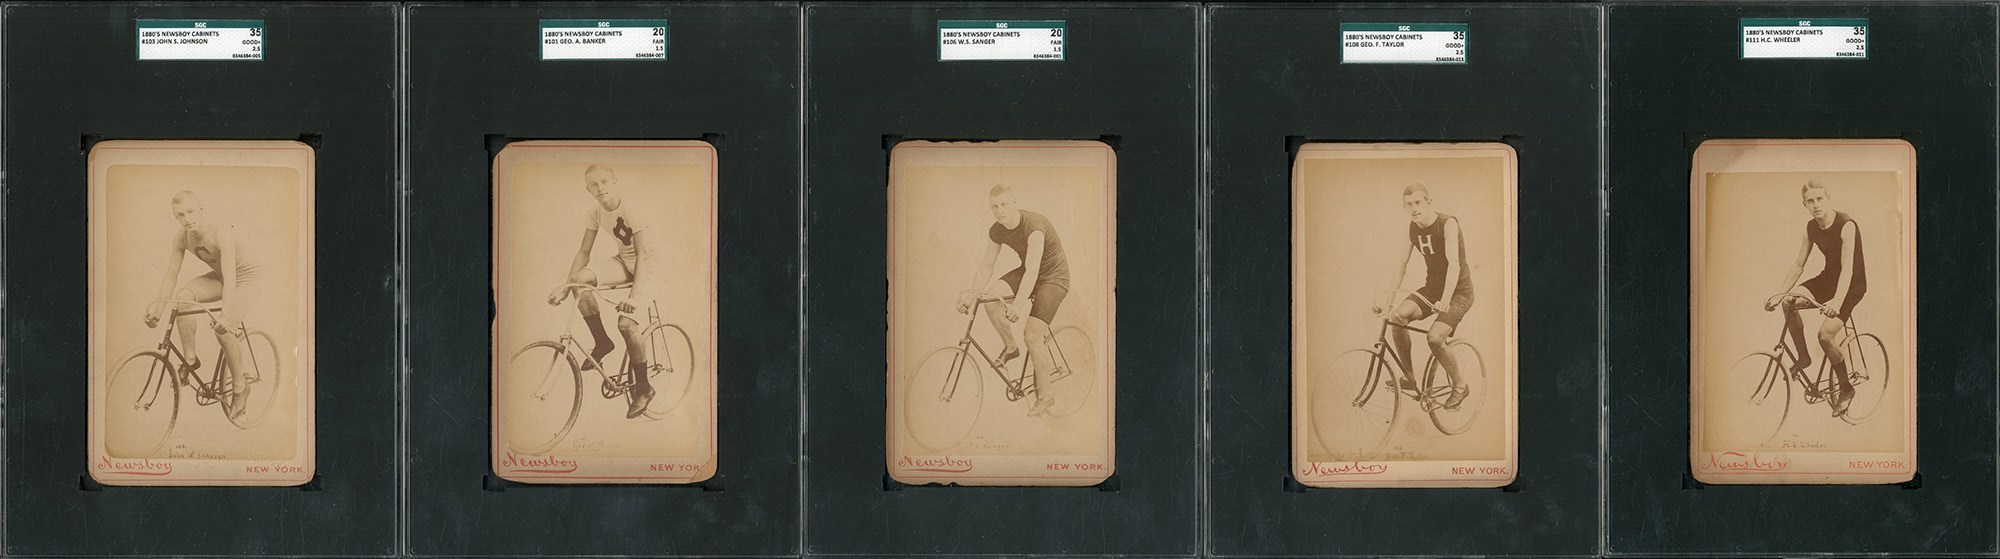 - 1880s Newsboy Cabinets Collection of 5 Cyclists - All SGC Graded